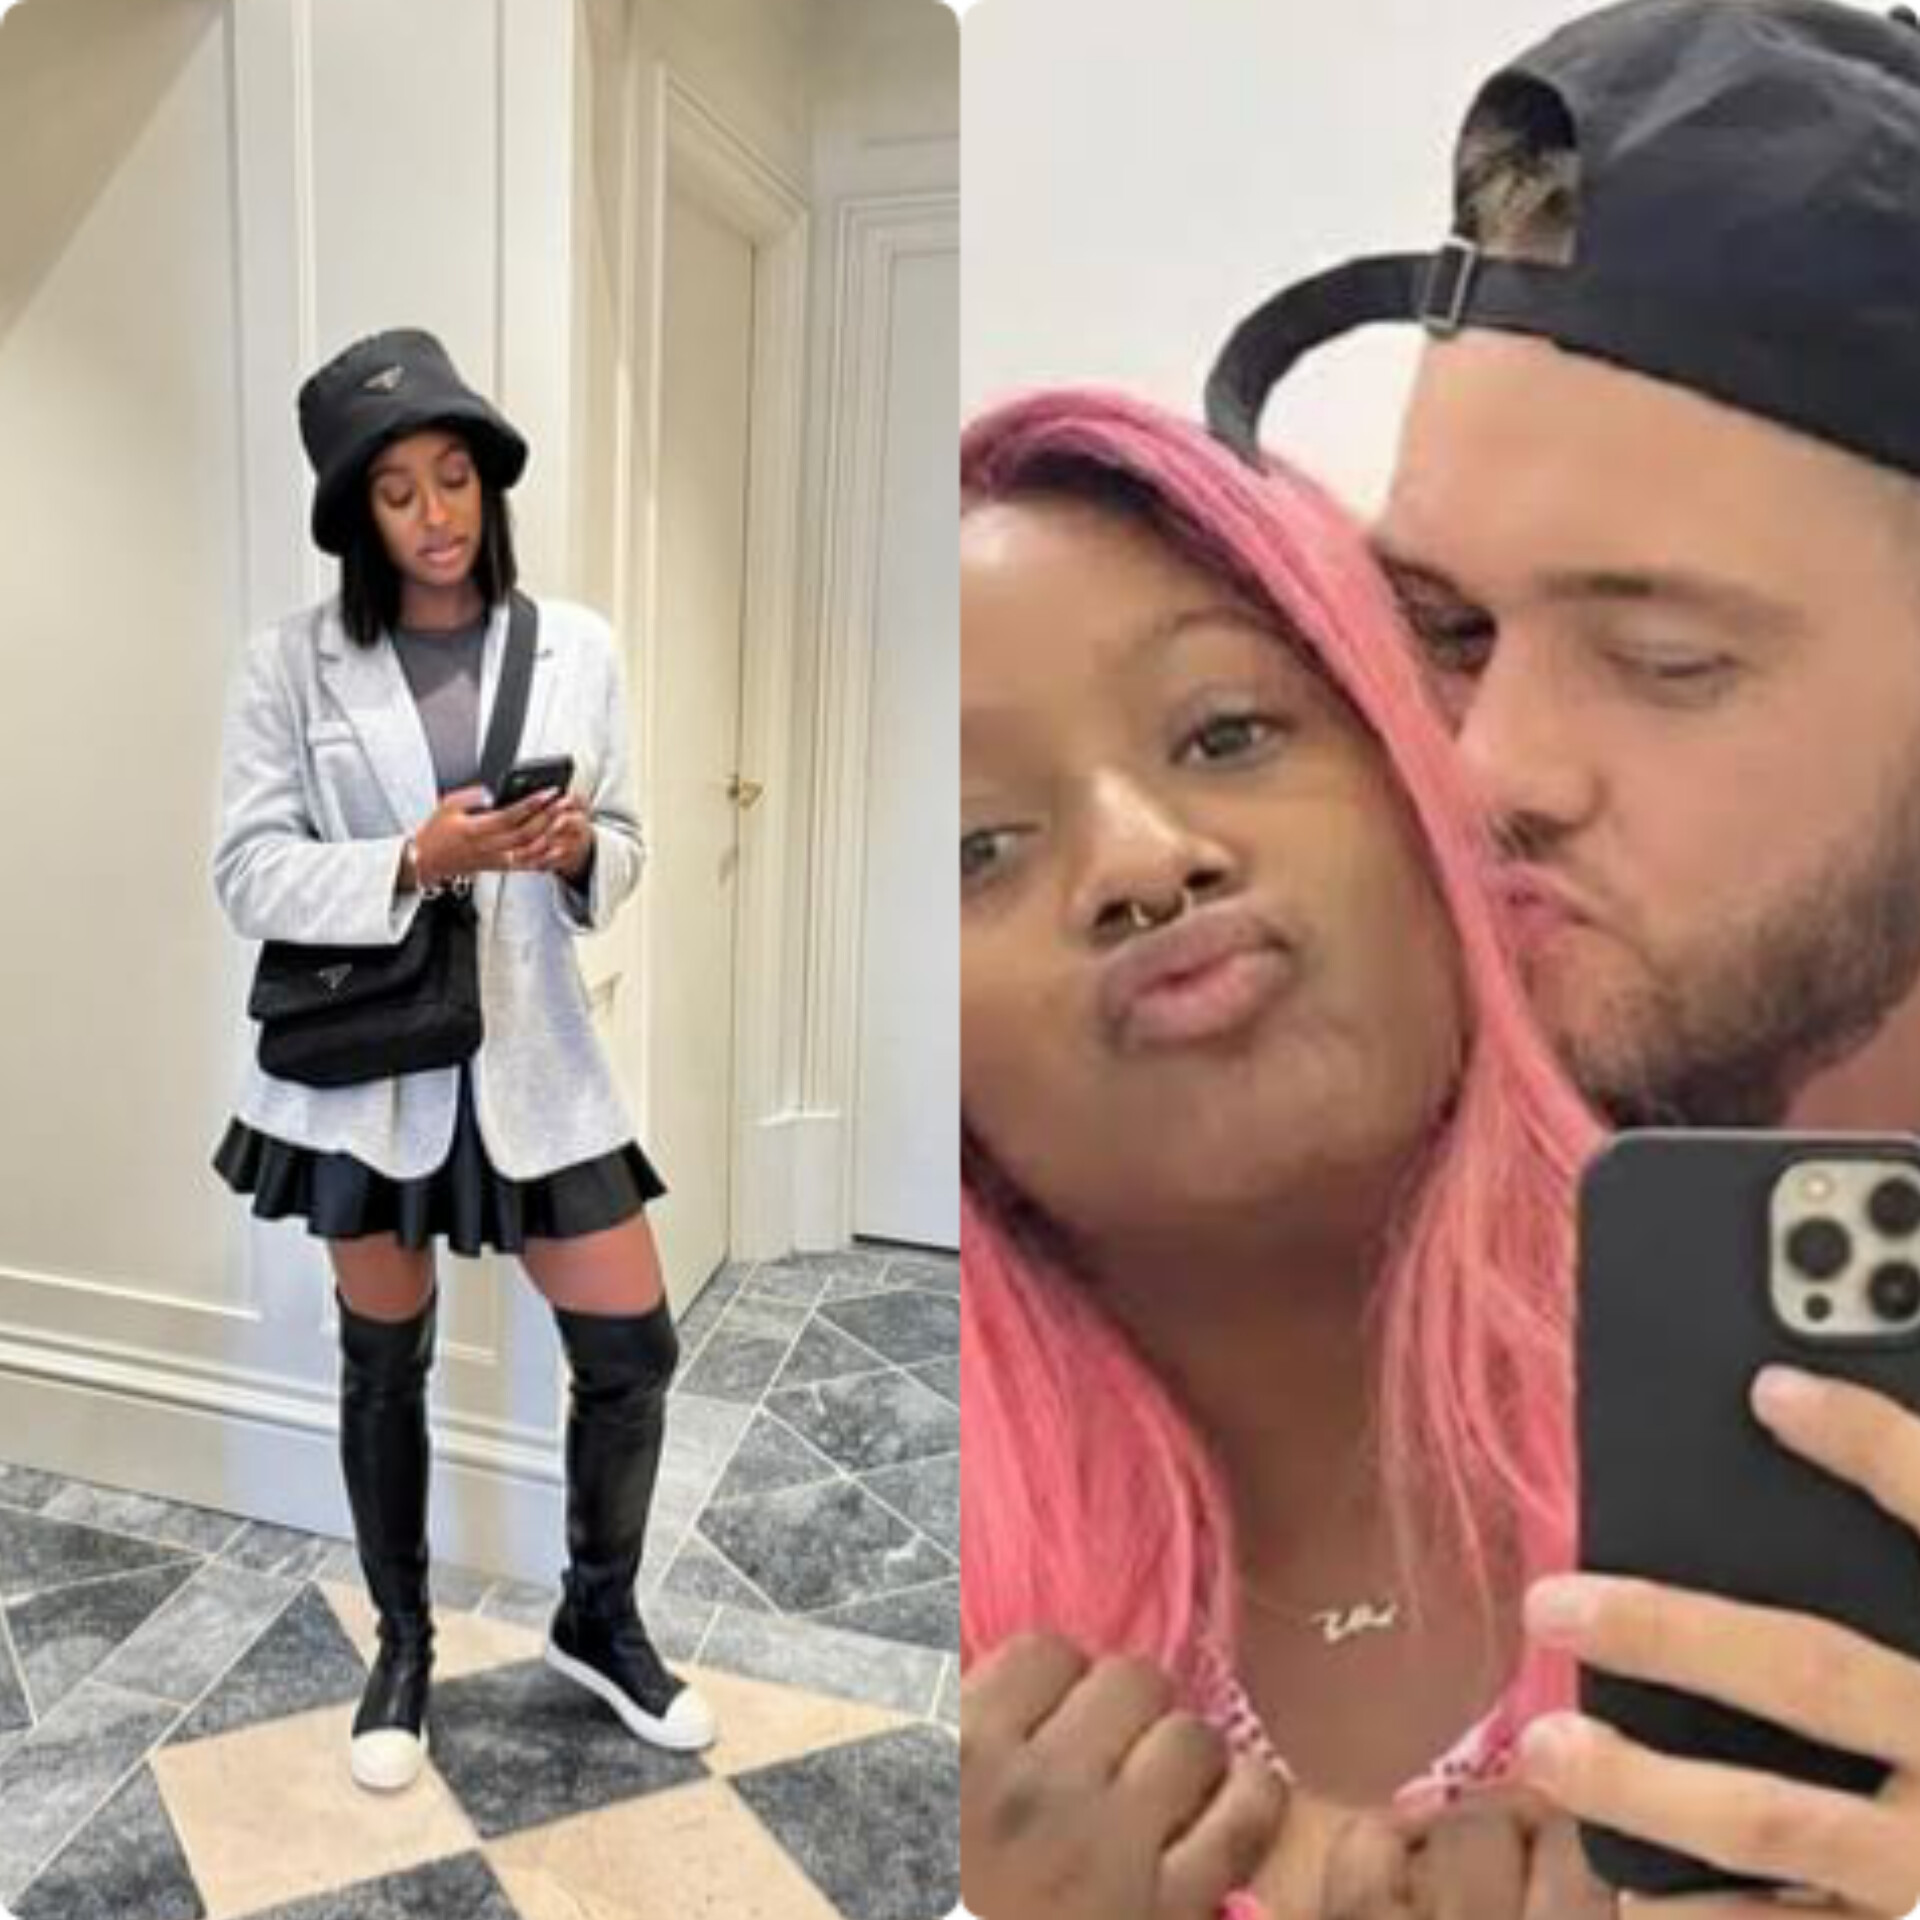 "I Had One Of The Worst Year Of My Life Last Year Because I Didn't Day NO" – DJ Cuppy Regrets Not Saying No To Her Ex-Fiance, Ryan Taylor (VIDEO)